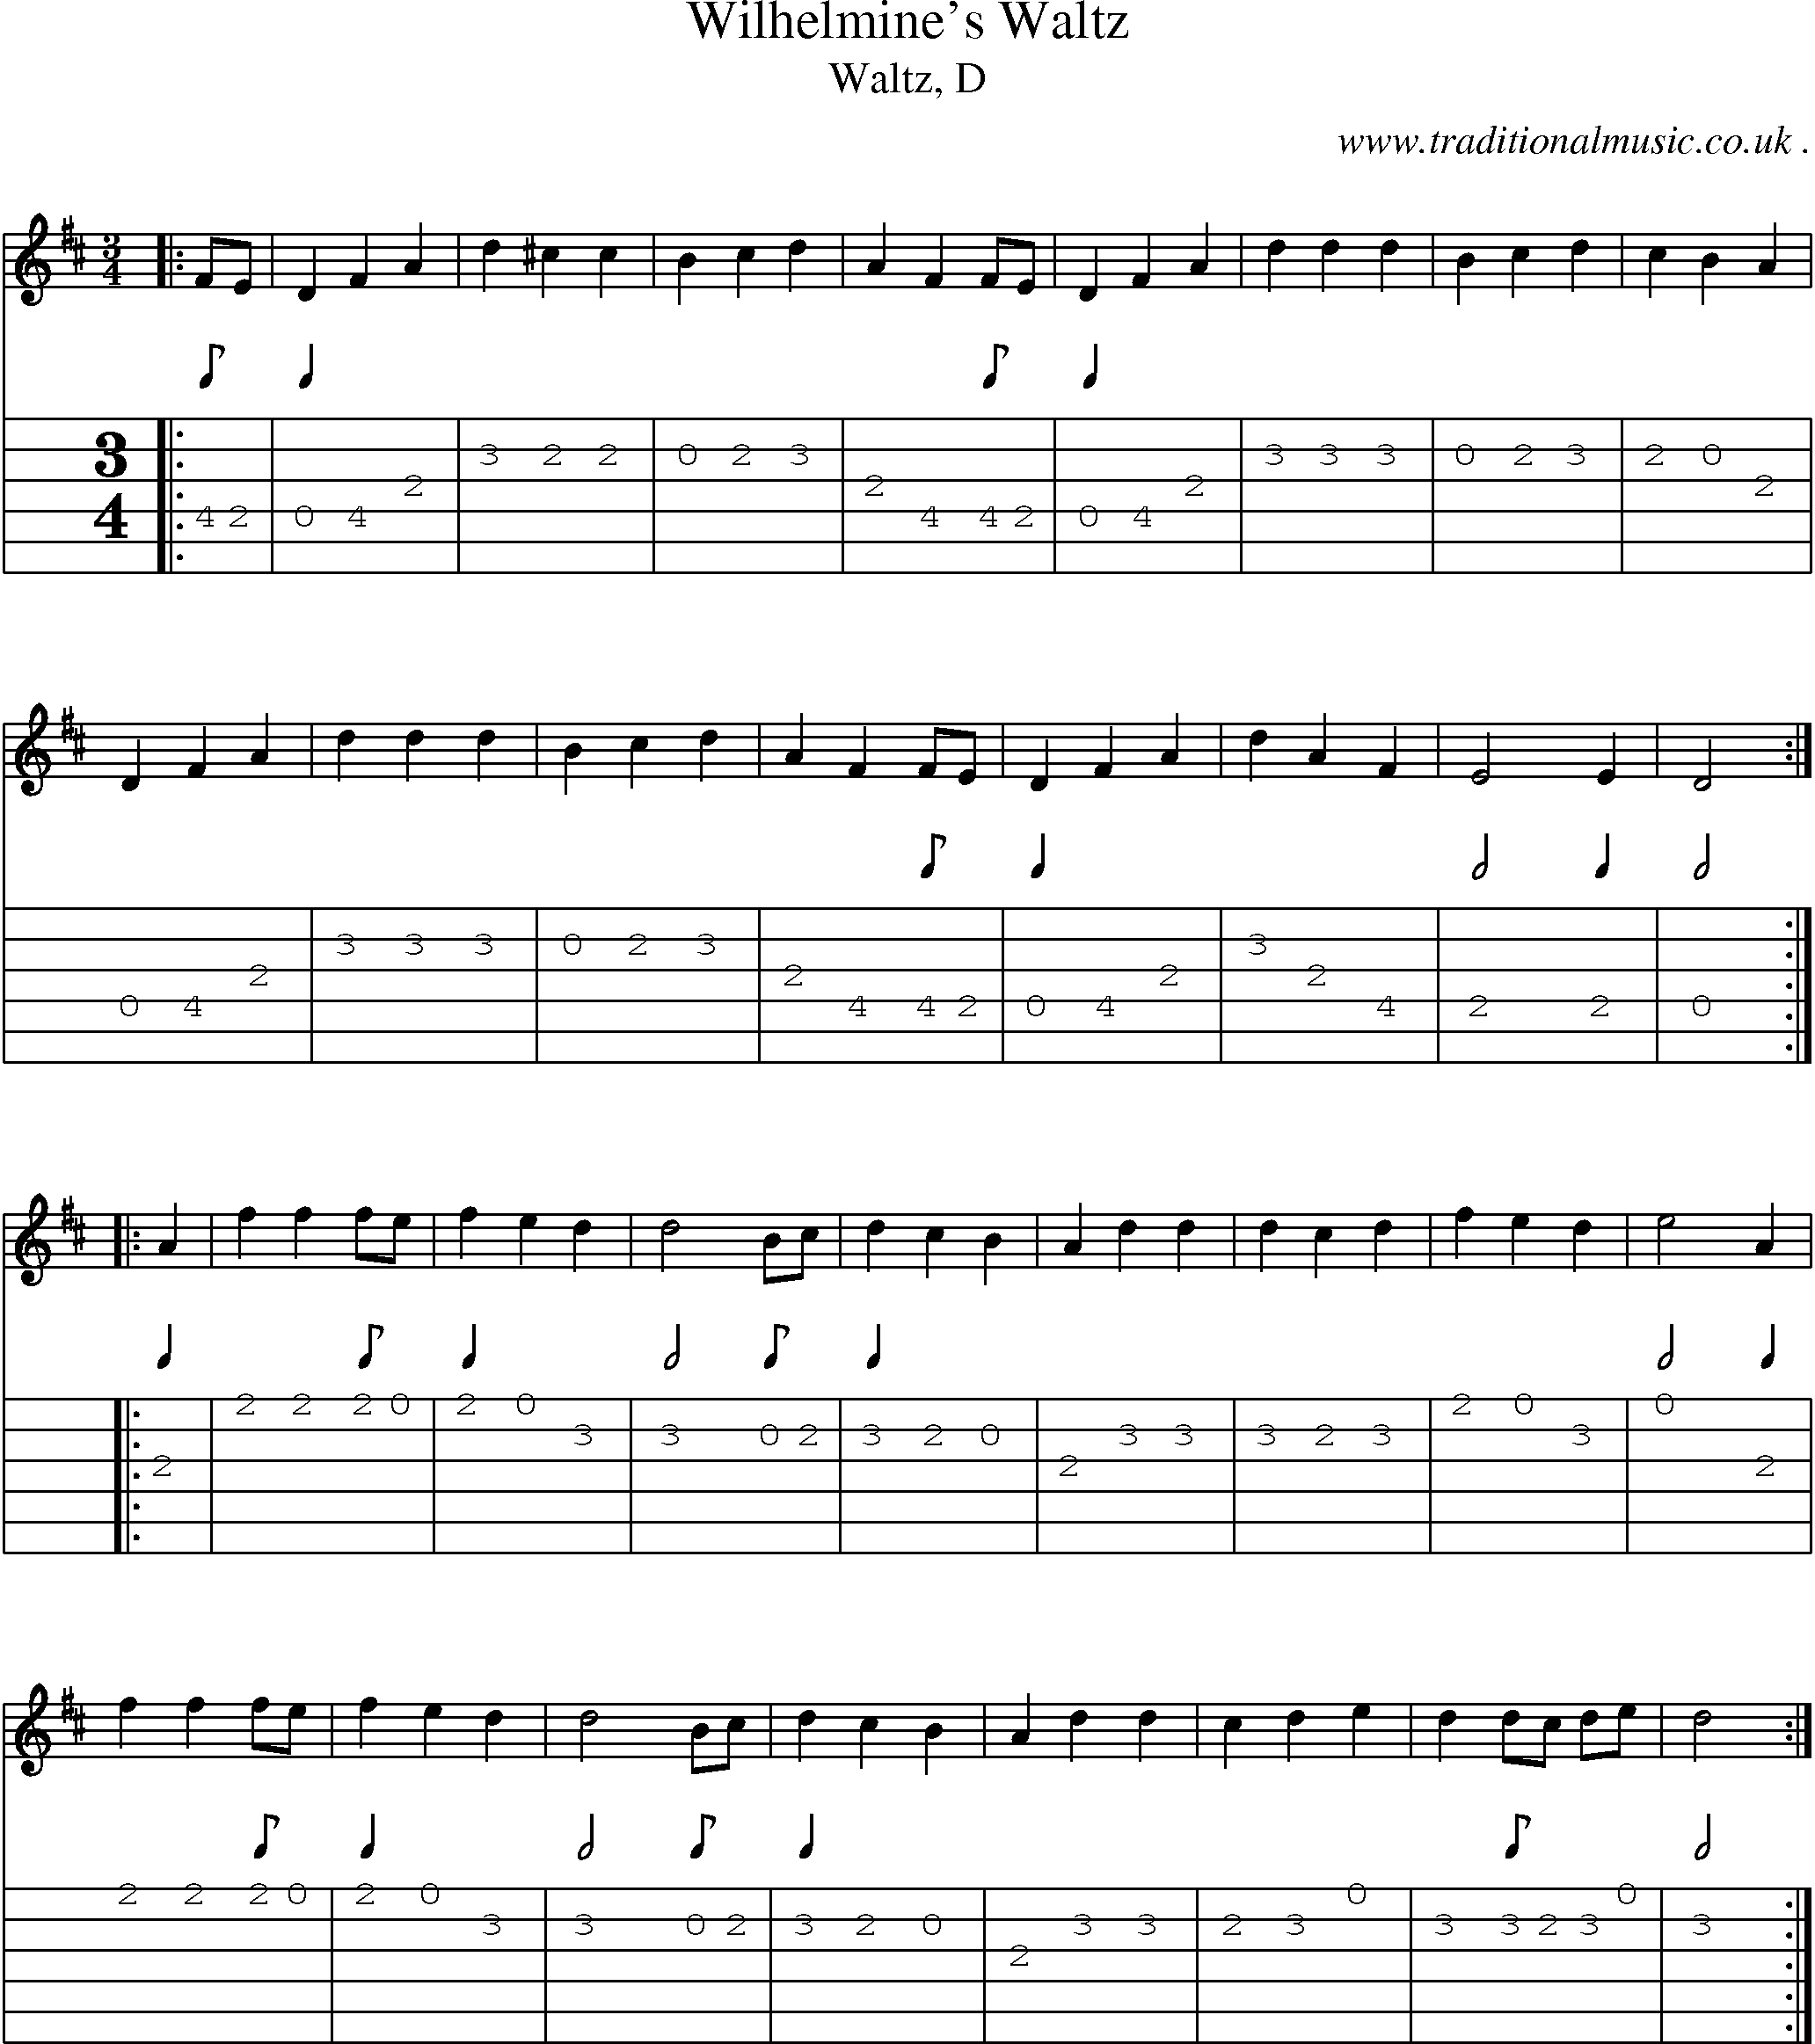 Sheet-music  score, Chords and Guitar Tabs for Wilhelmines Waltz